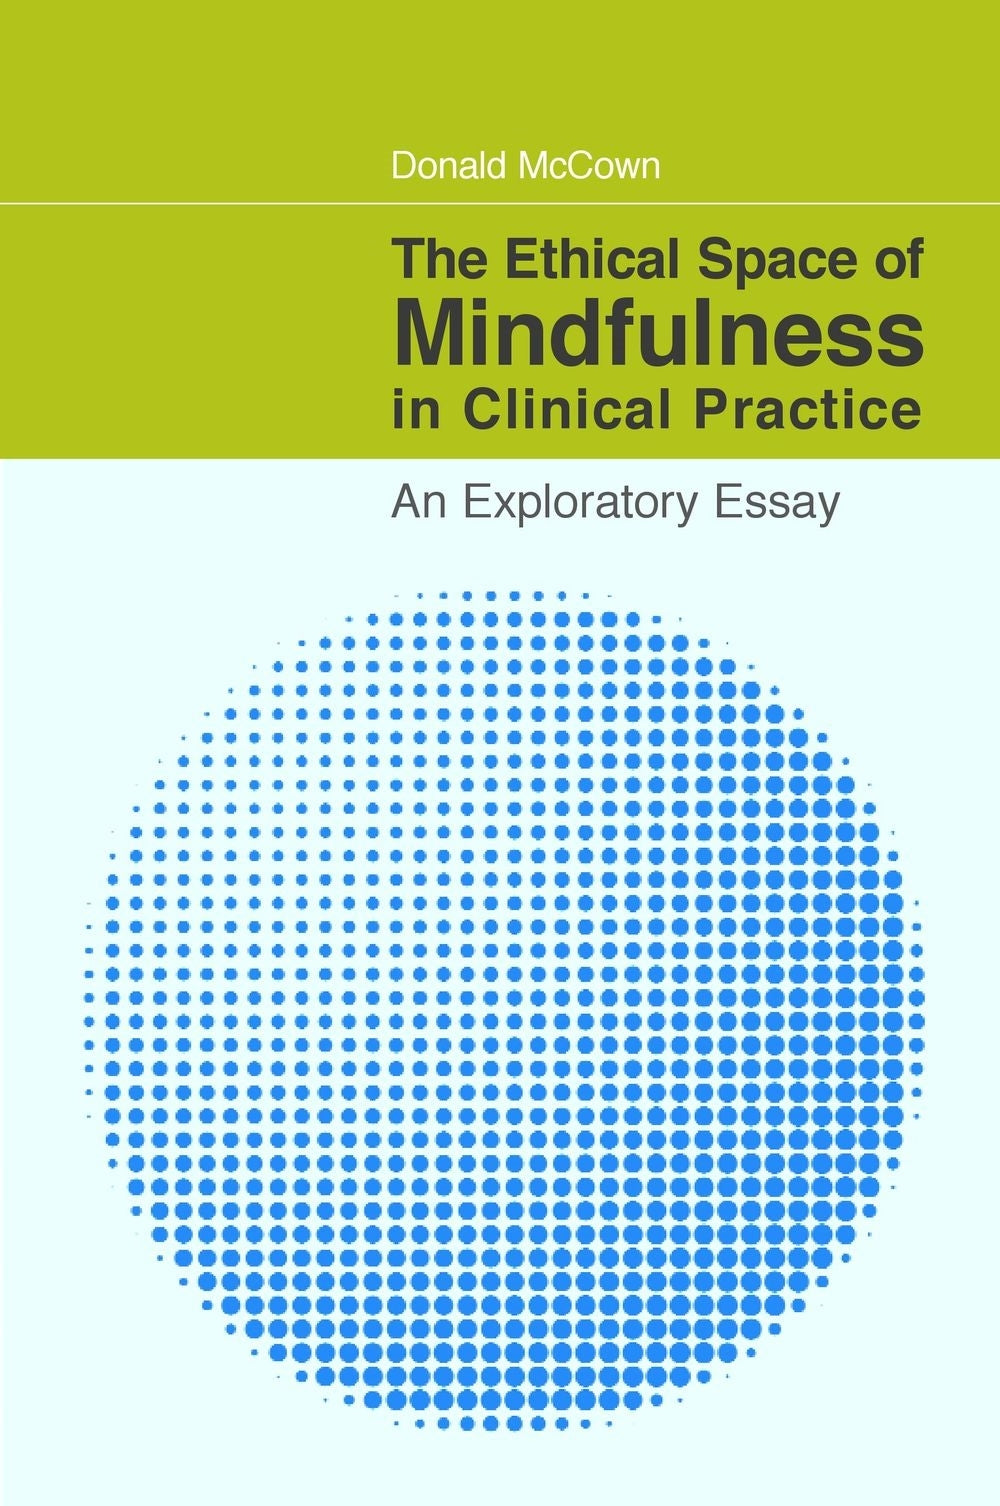 The Ethical Space of Mindfulness in Clinical Practice by Kenneth Gergen, Donald McCown